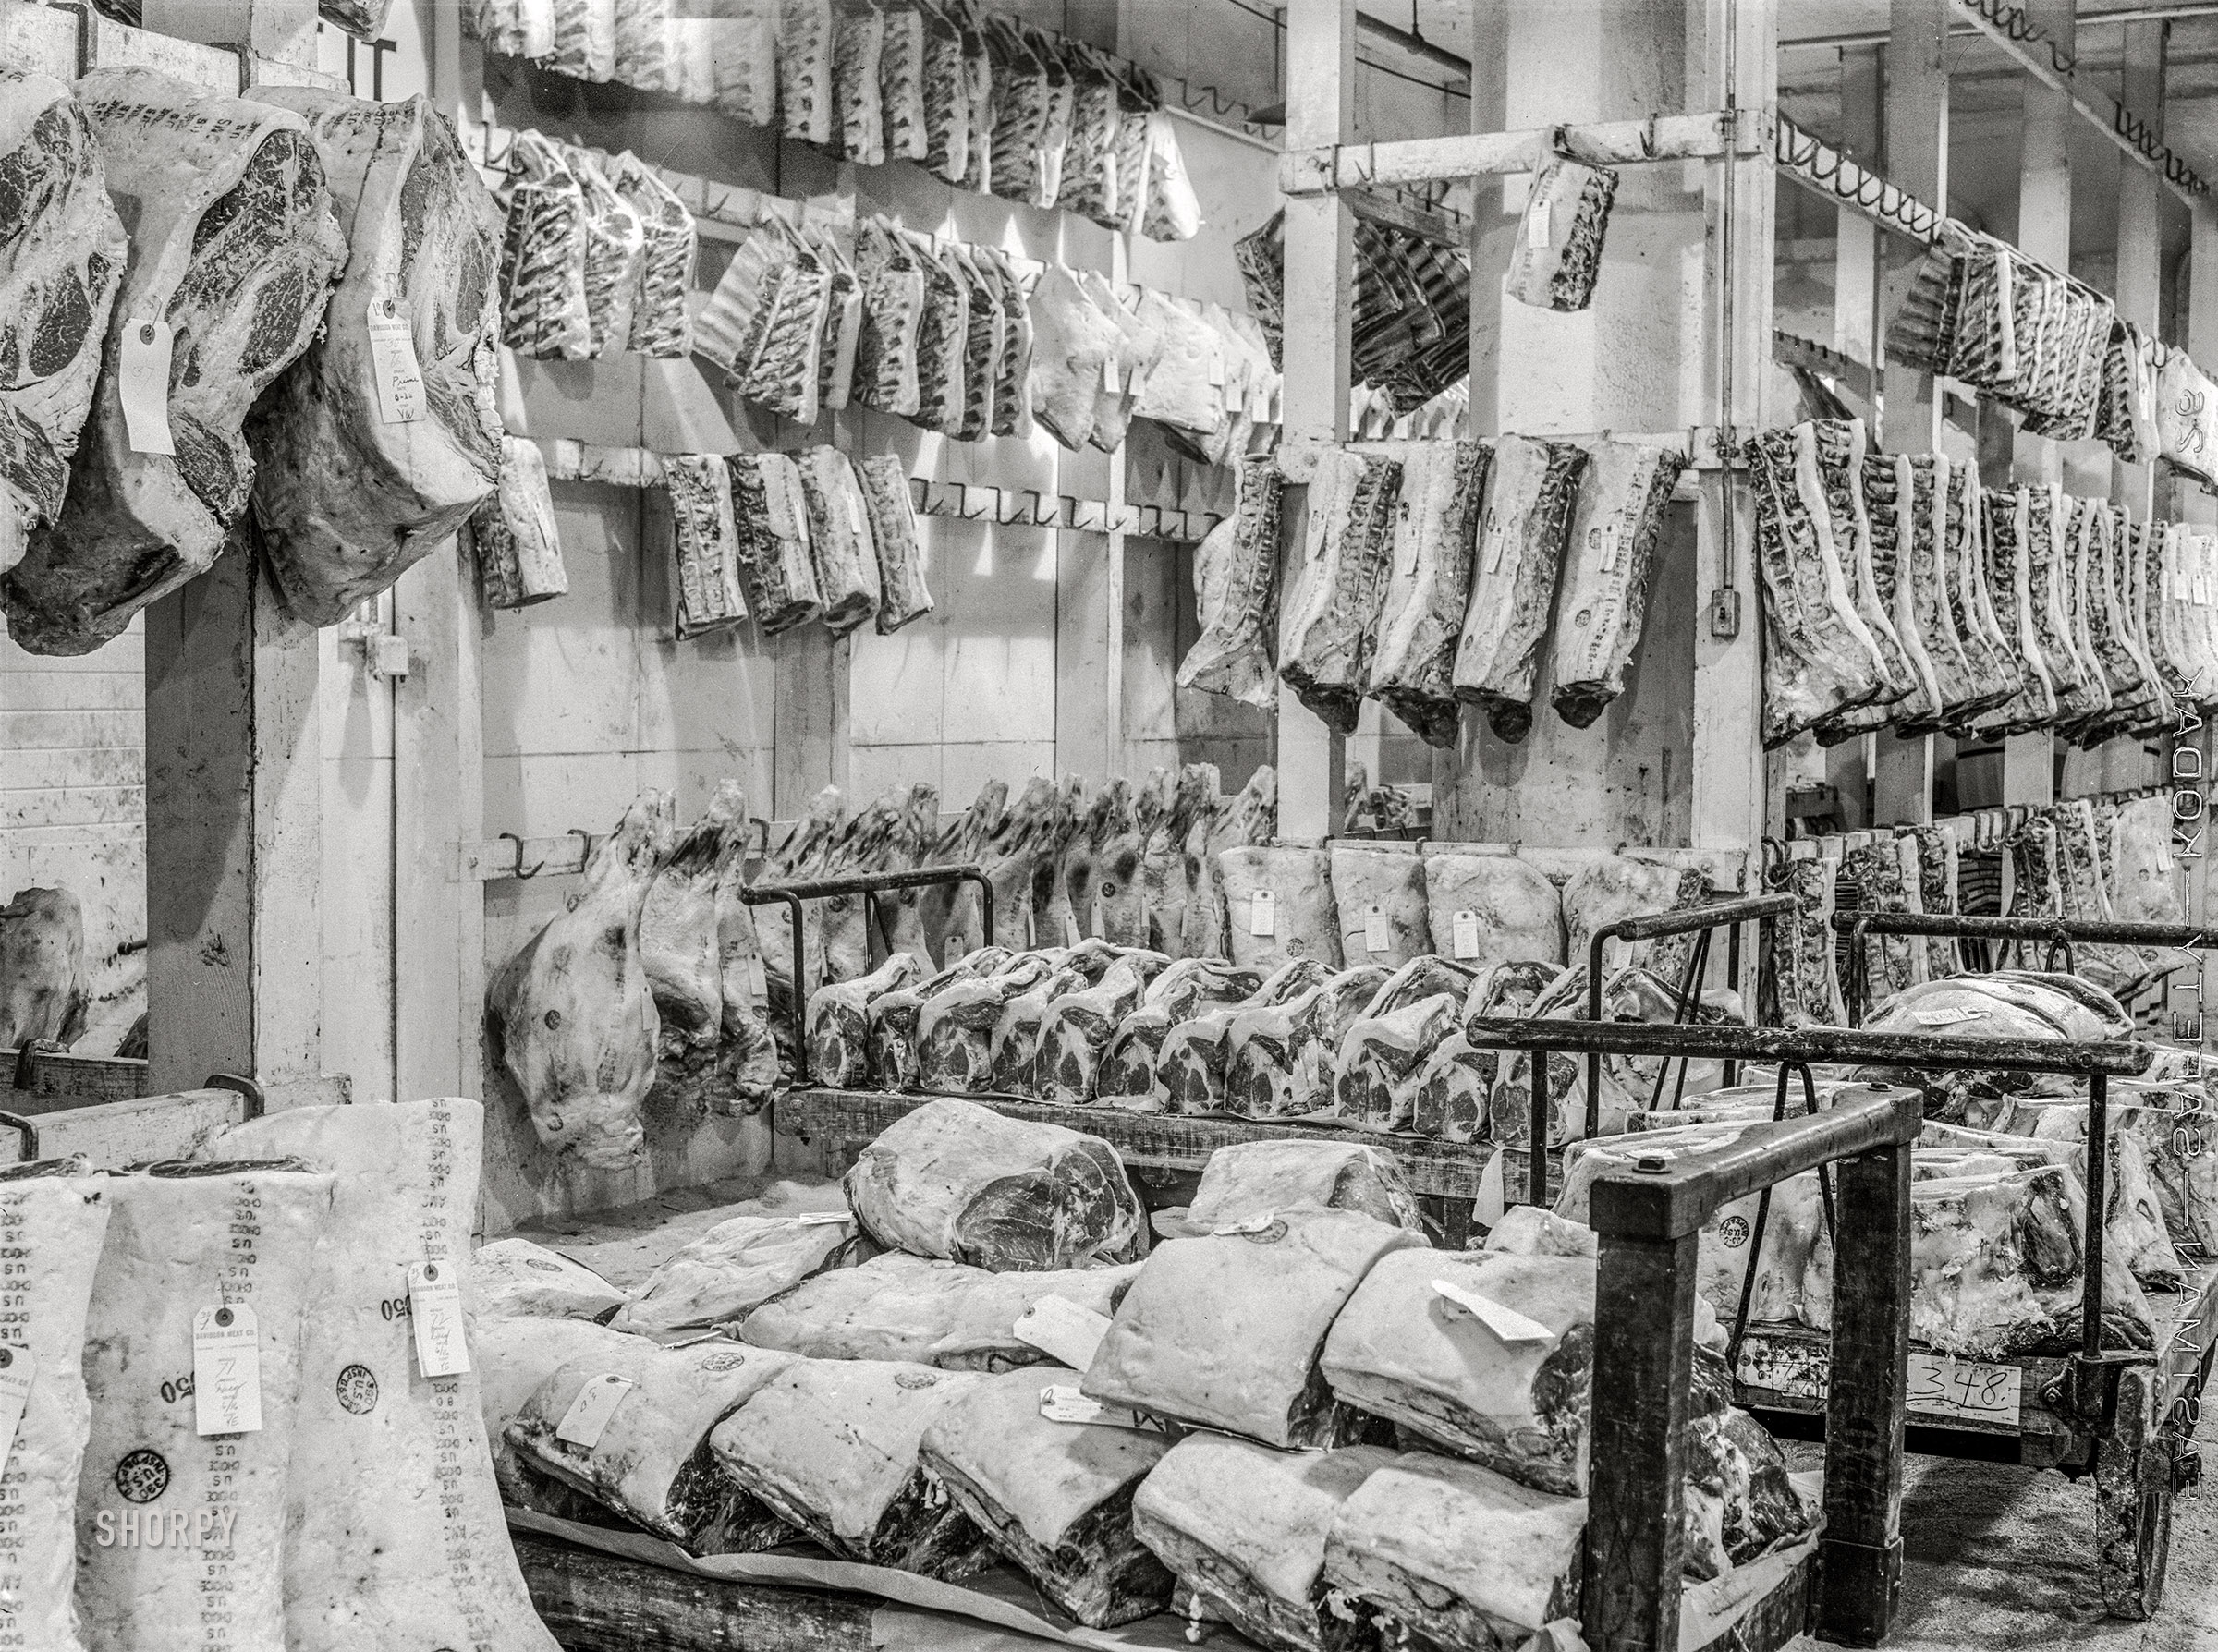 June 1941. "Chicago, Illinois. Meat in cold storage. Davidson Meat Company, supplier of hotels, restaurants, etc." Medium format negative by John Vachon. View full size.